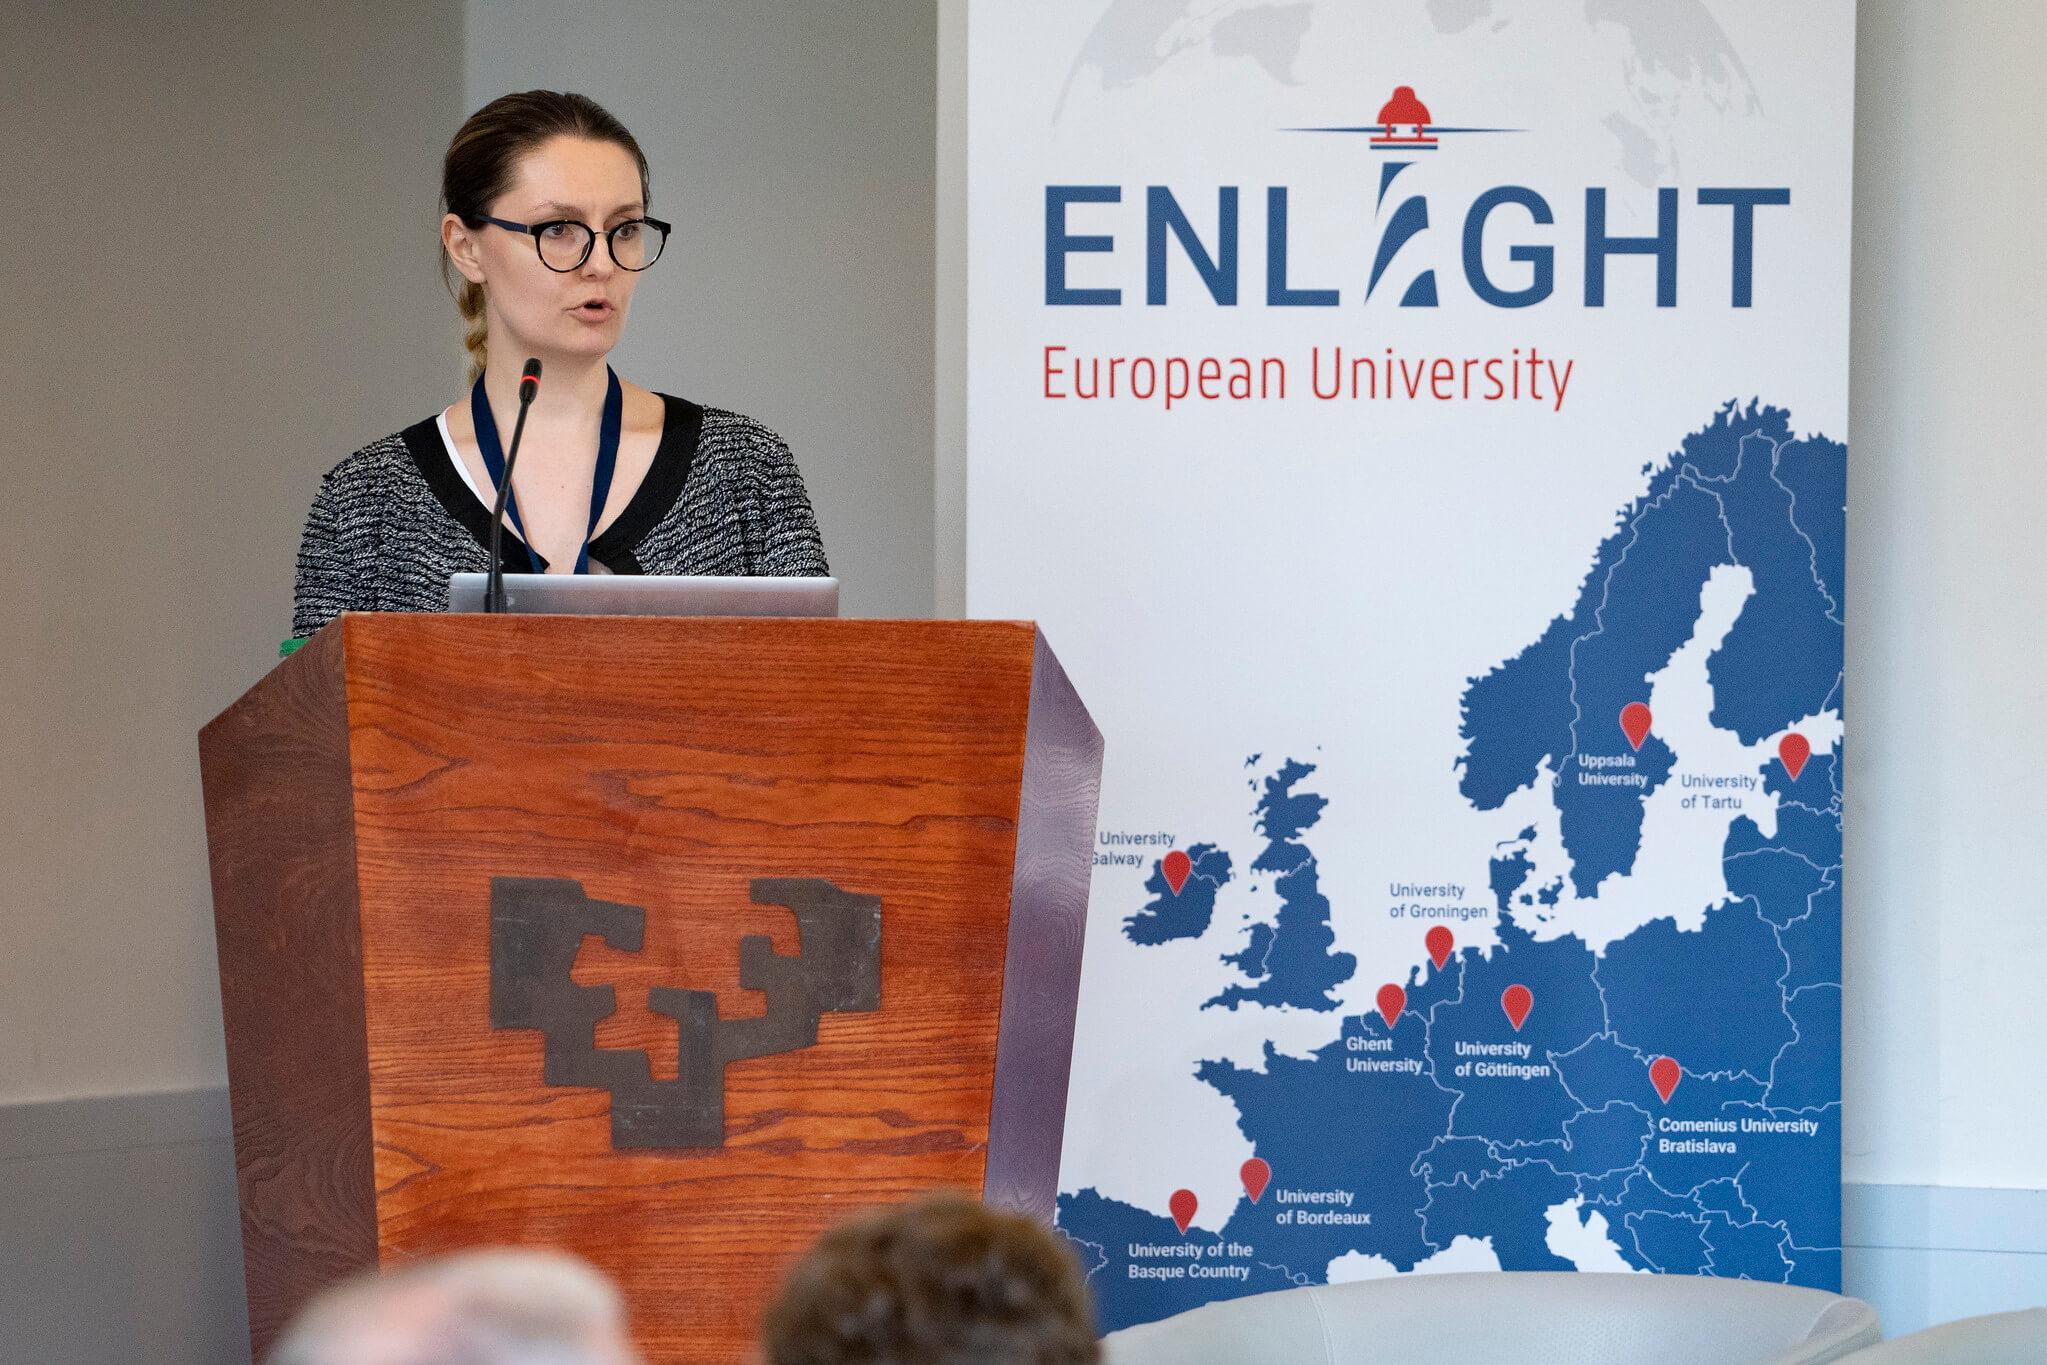 SWPS University Researcher Among Experts at ENLIGHT Conference